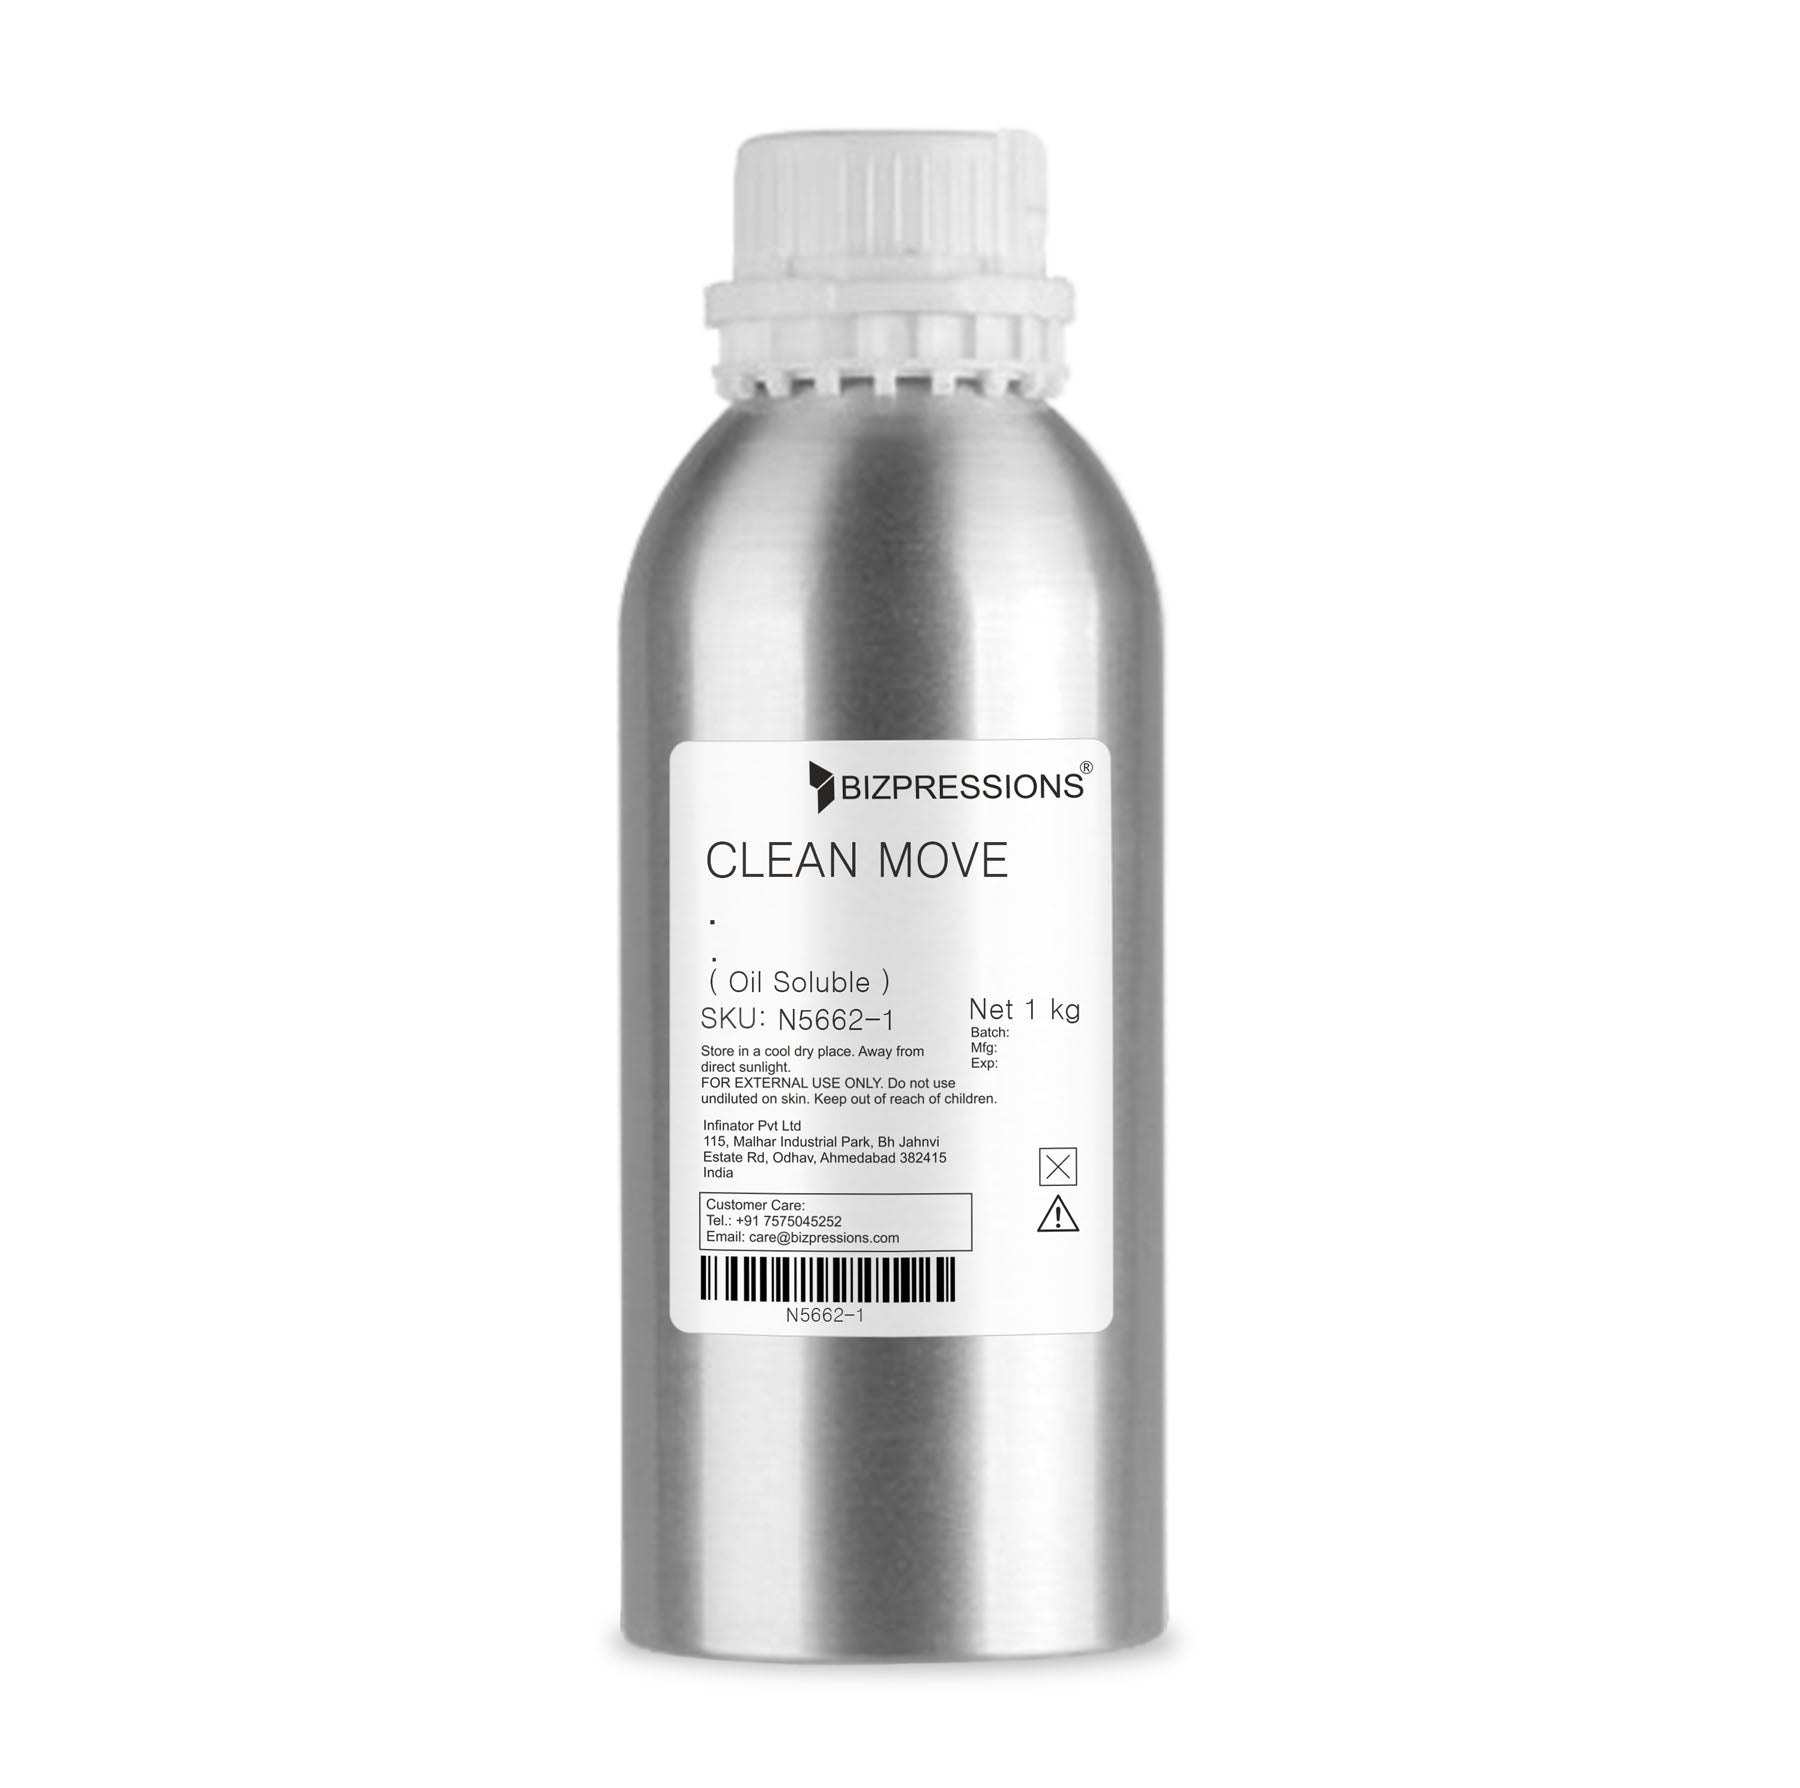 CLEAN MOVE - Fragrance ( Oil Soluble ) - 1 kg